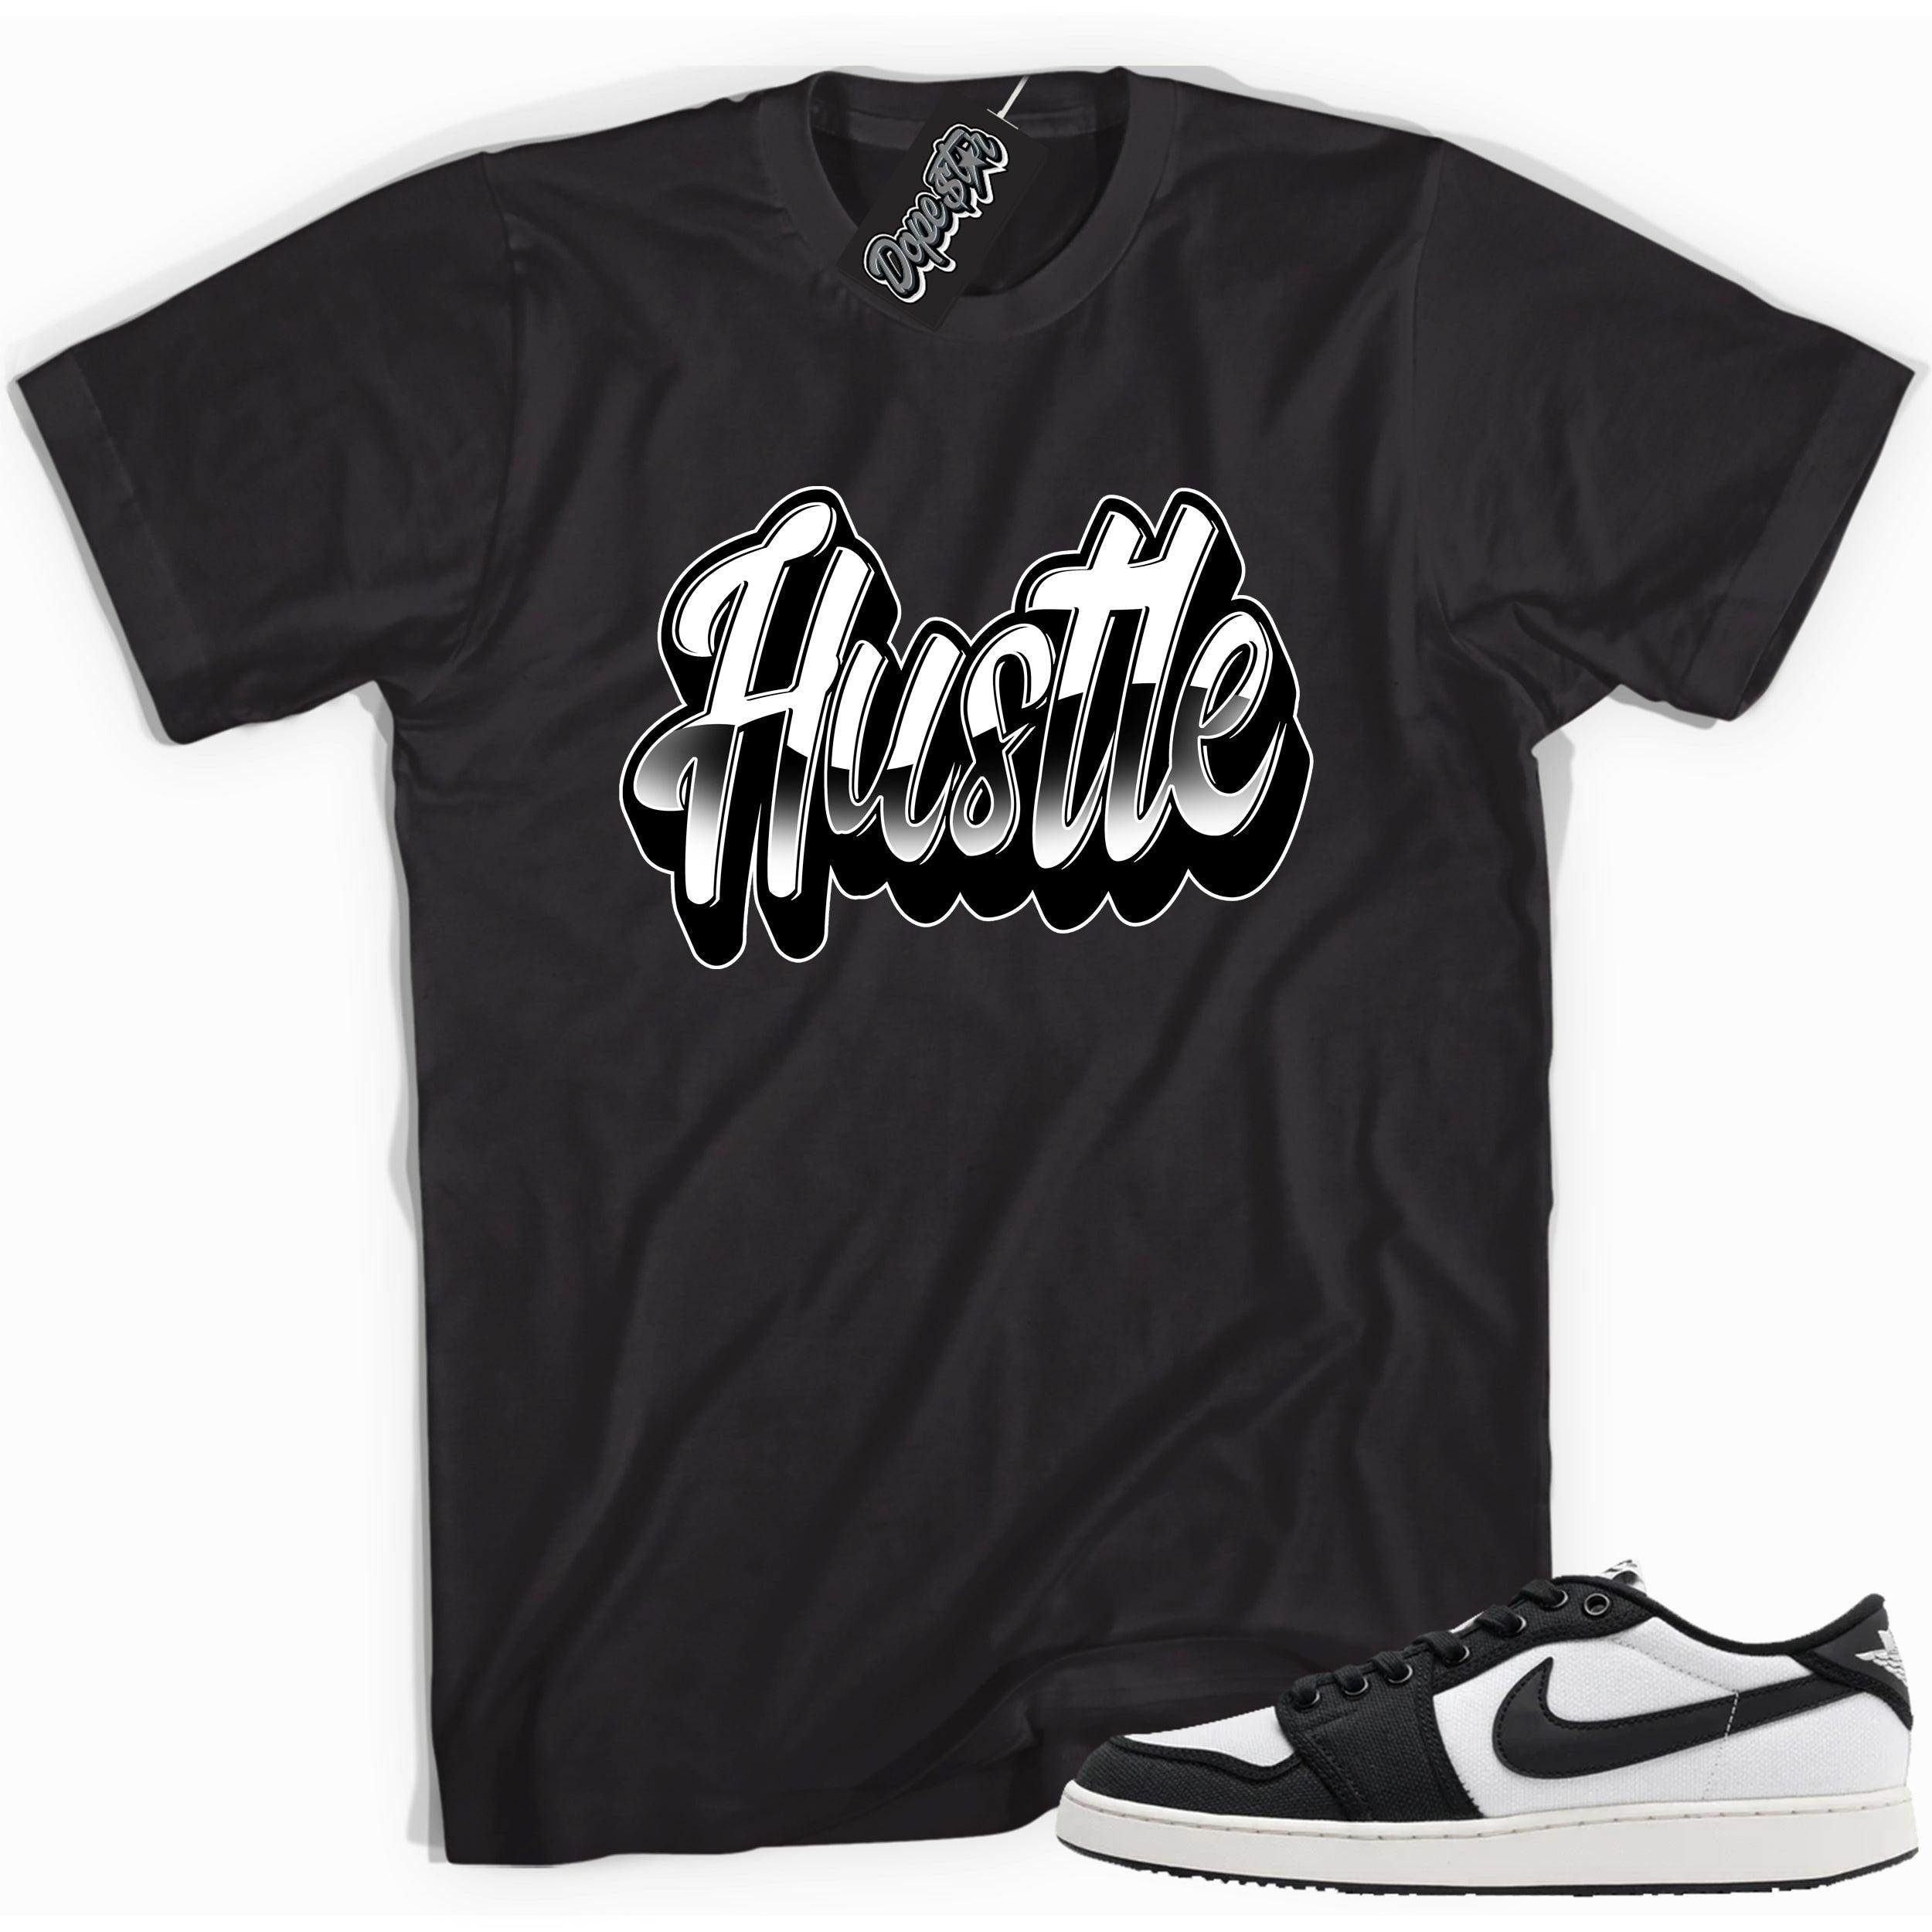 Cool black graphic tee with 'hustle' print, that perfectly matches Air Jordan 1 Retro Ajko Low Black & White sneakers.